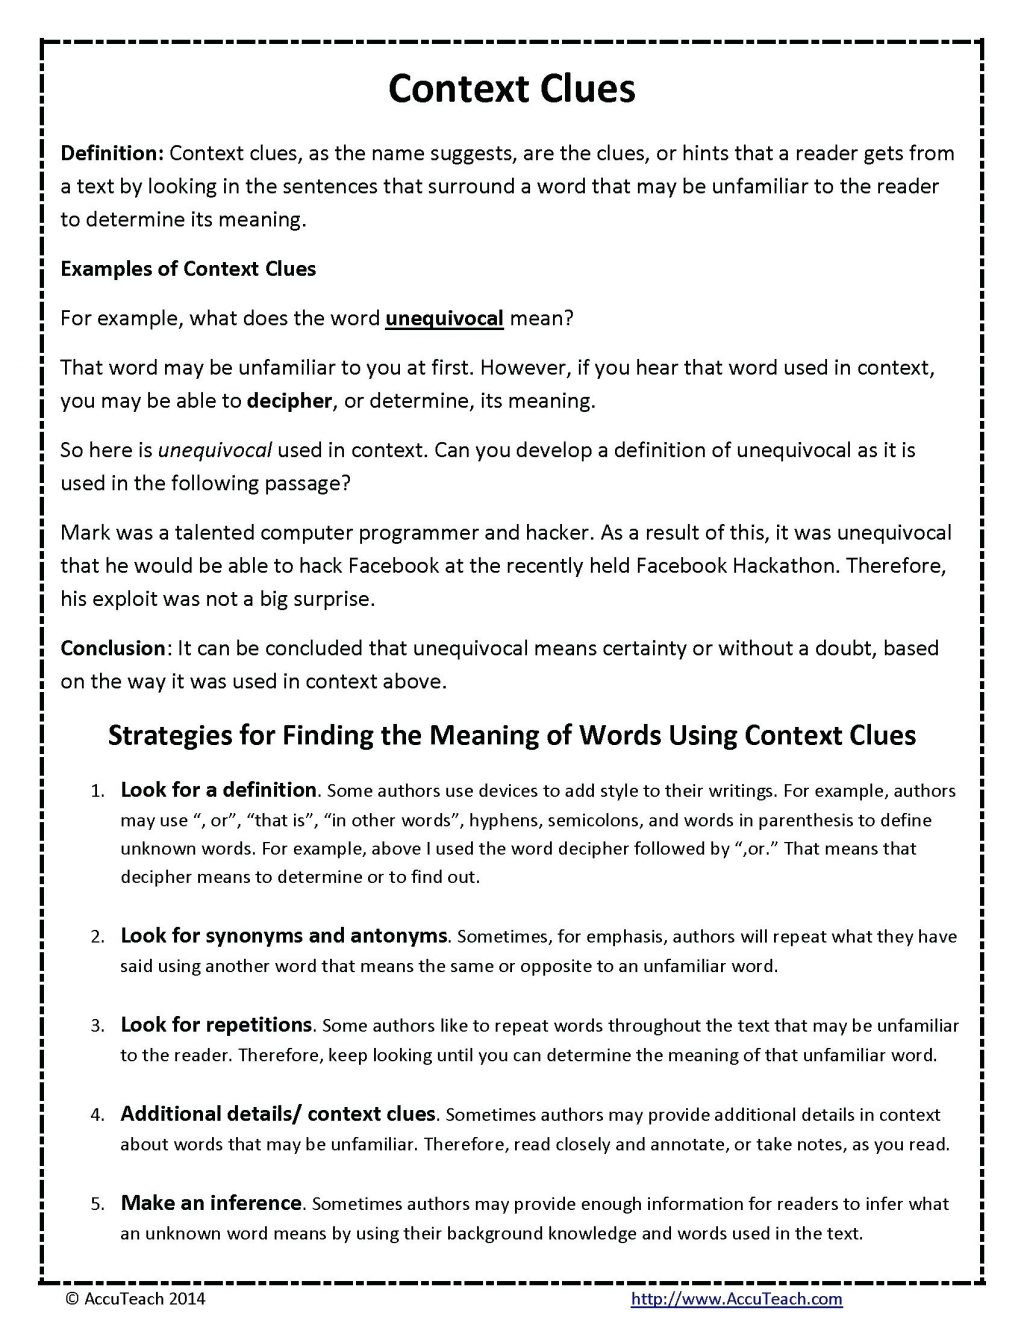 worksheet-ideas-outstanding-vocabulary-context-clues-db-excel